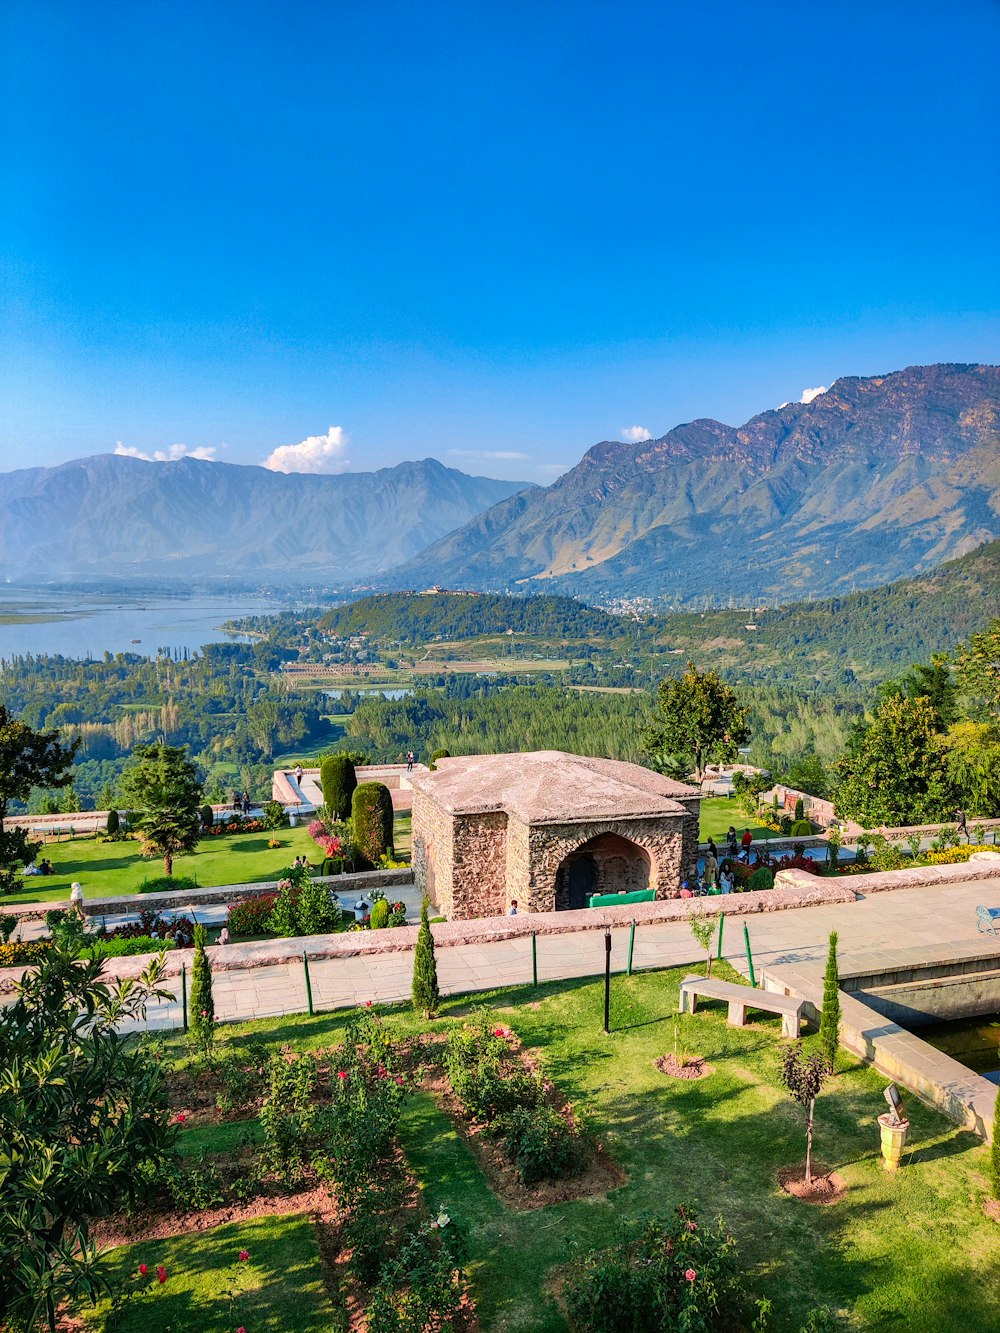 a scenic view of a park with mountains in the background